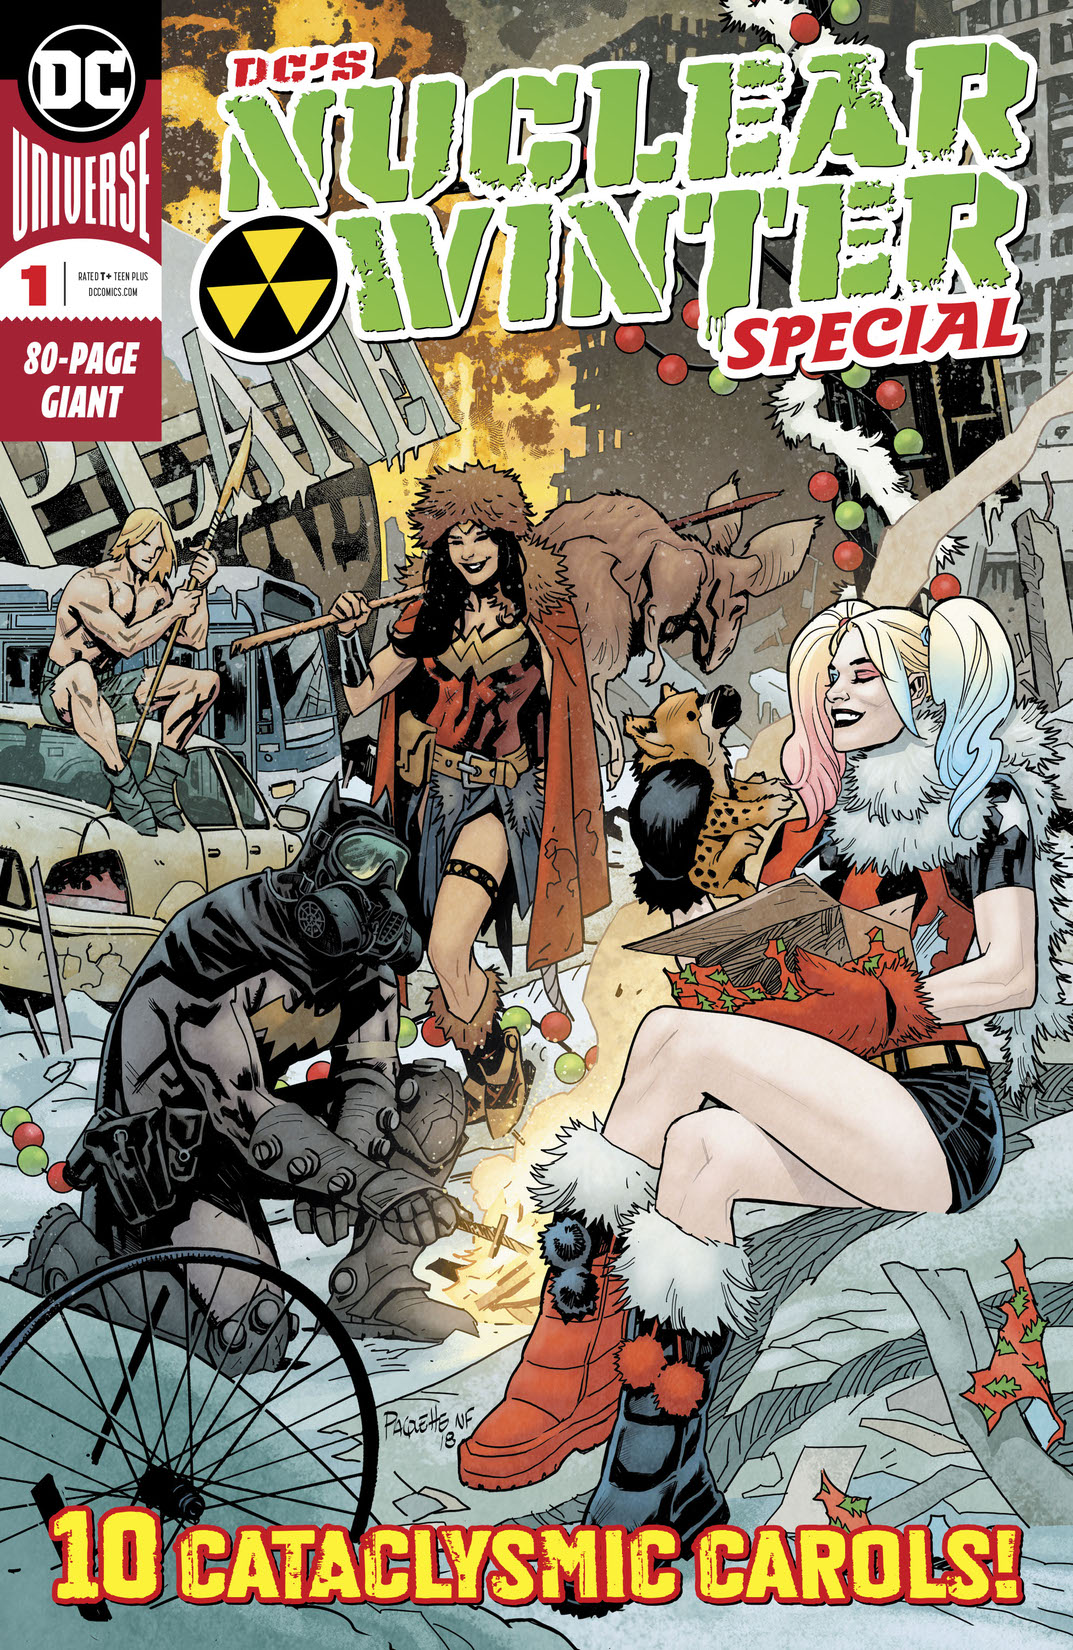 DC Nuclear Winter Special #1 preview images